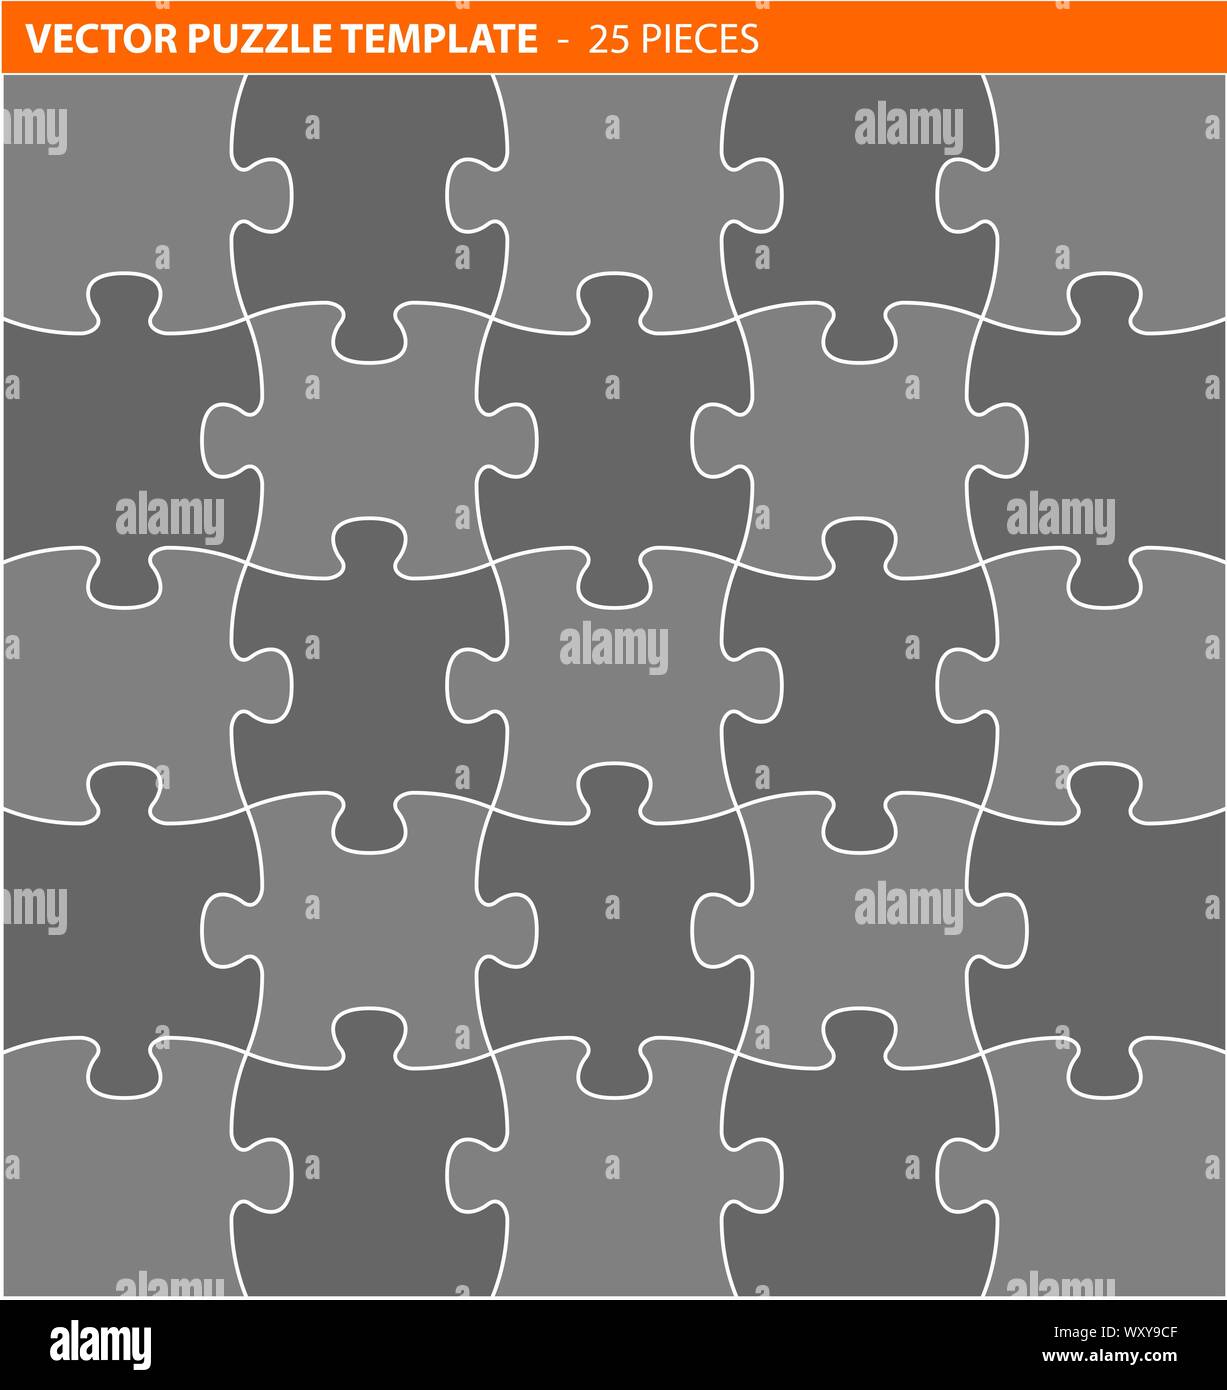 Complete vector puzzle / jigsaw template - 25 pieces Stock Vector Image &  Art - Alamy